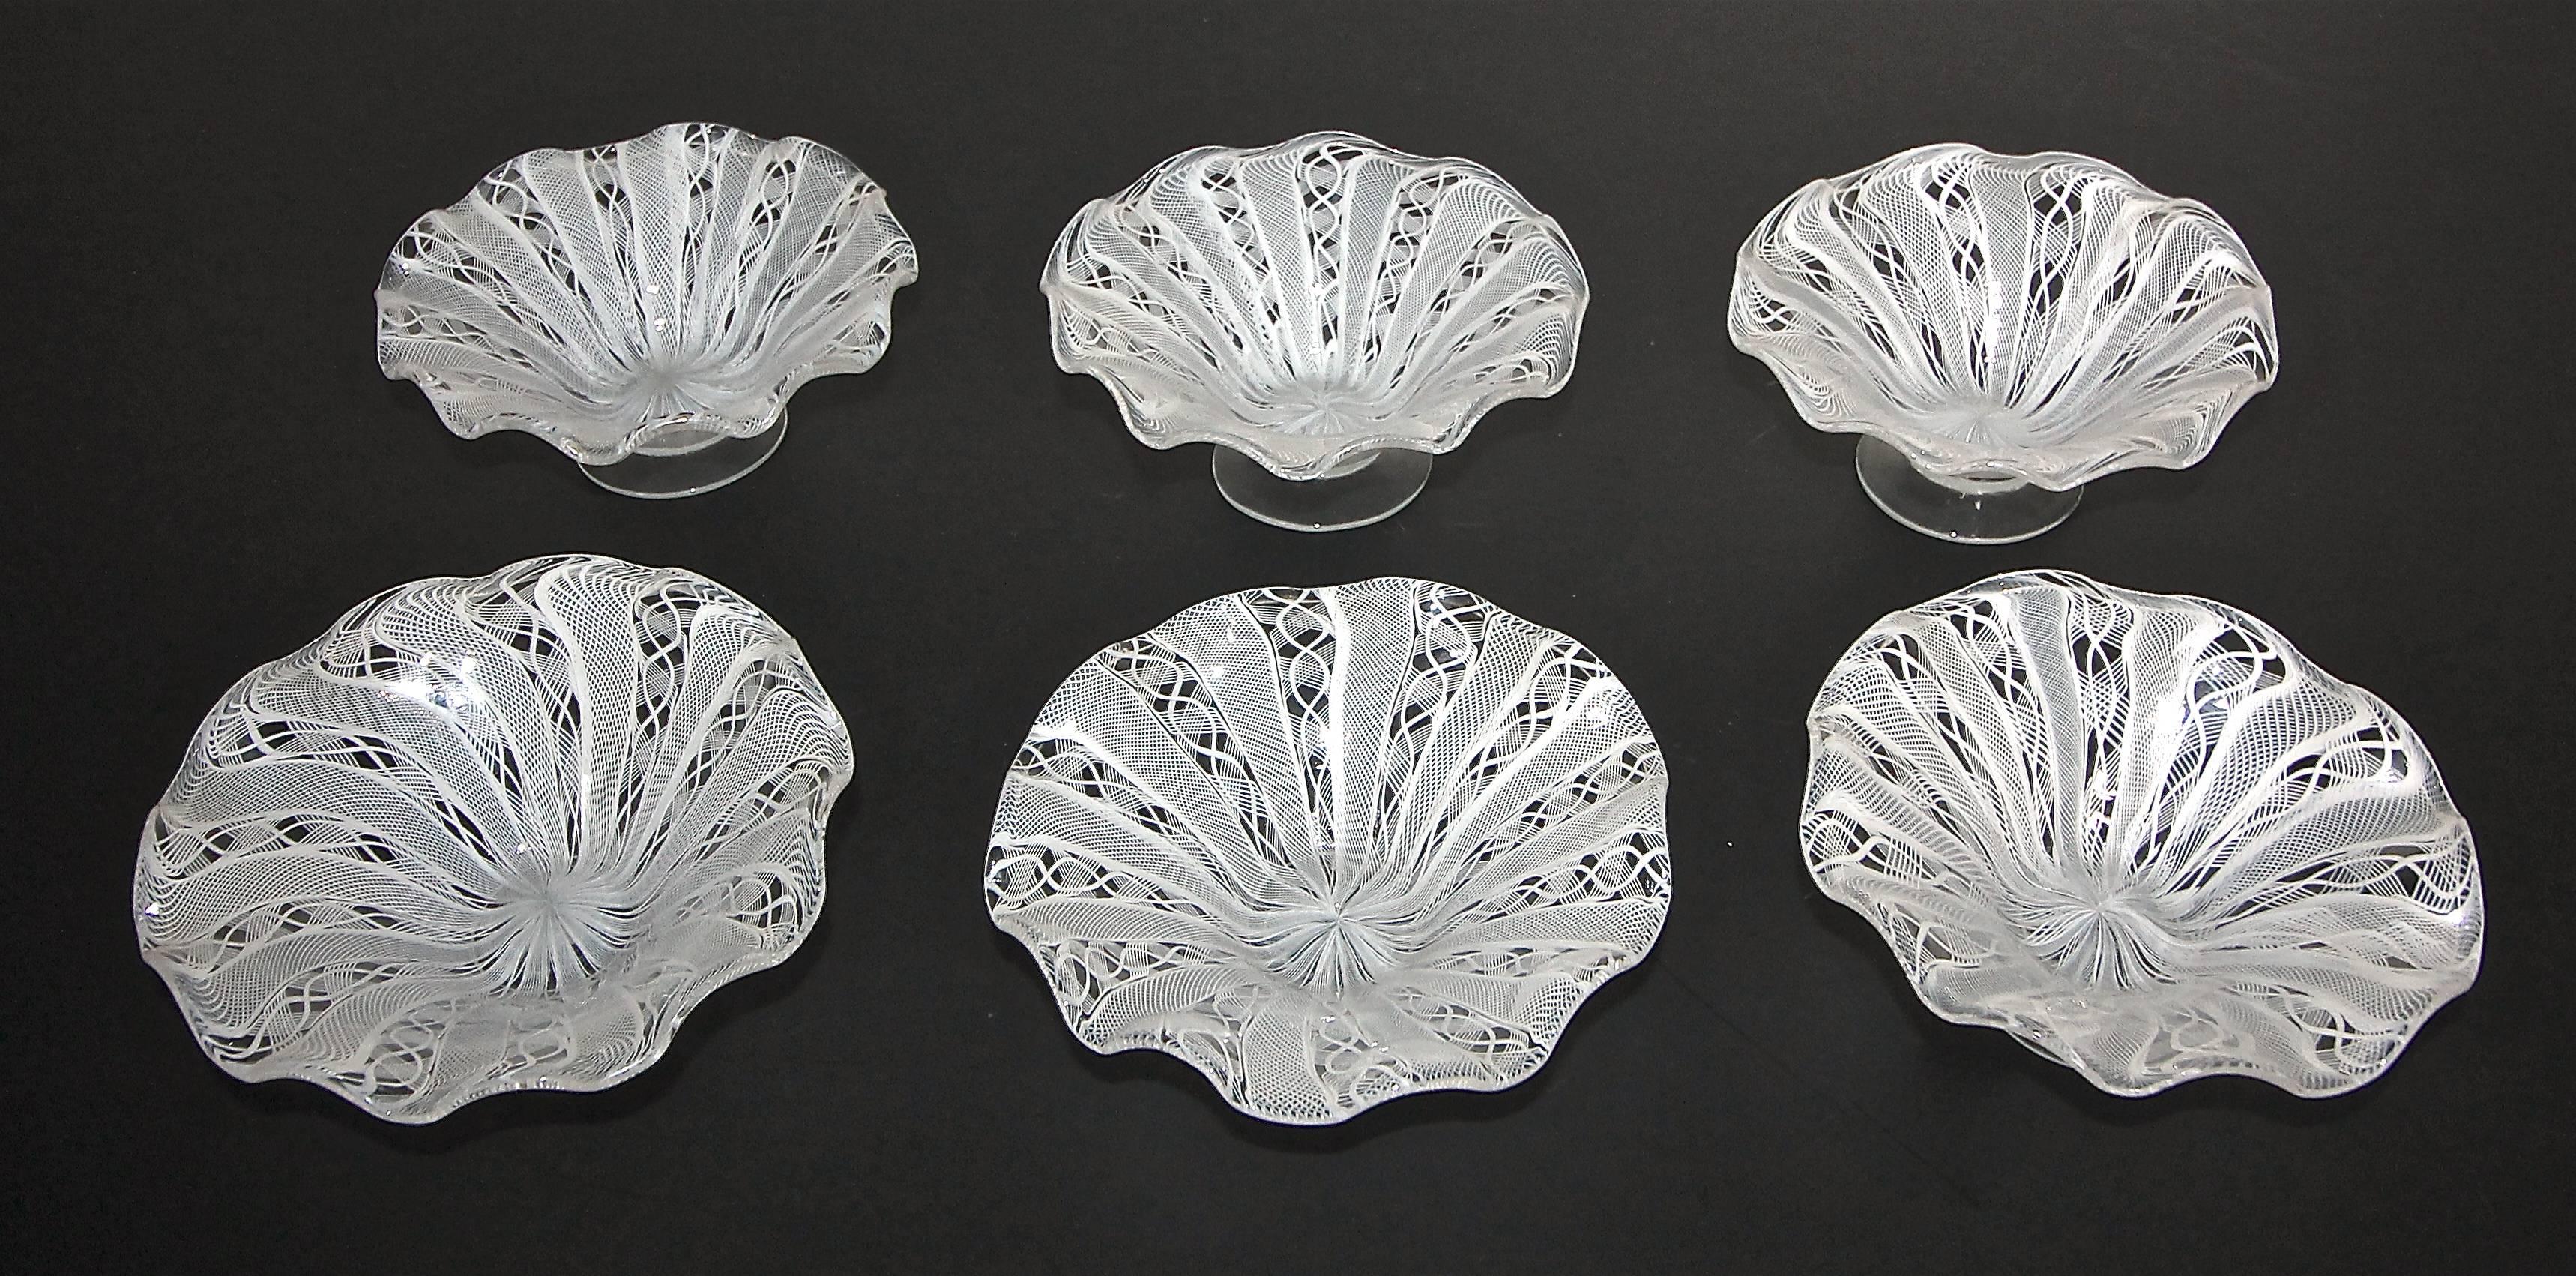 Set of six handblown clear and white latticino Murano candy or dessert bowls or dishes, attributed to Salviati.